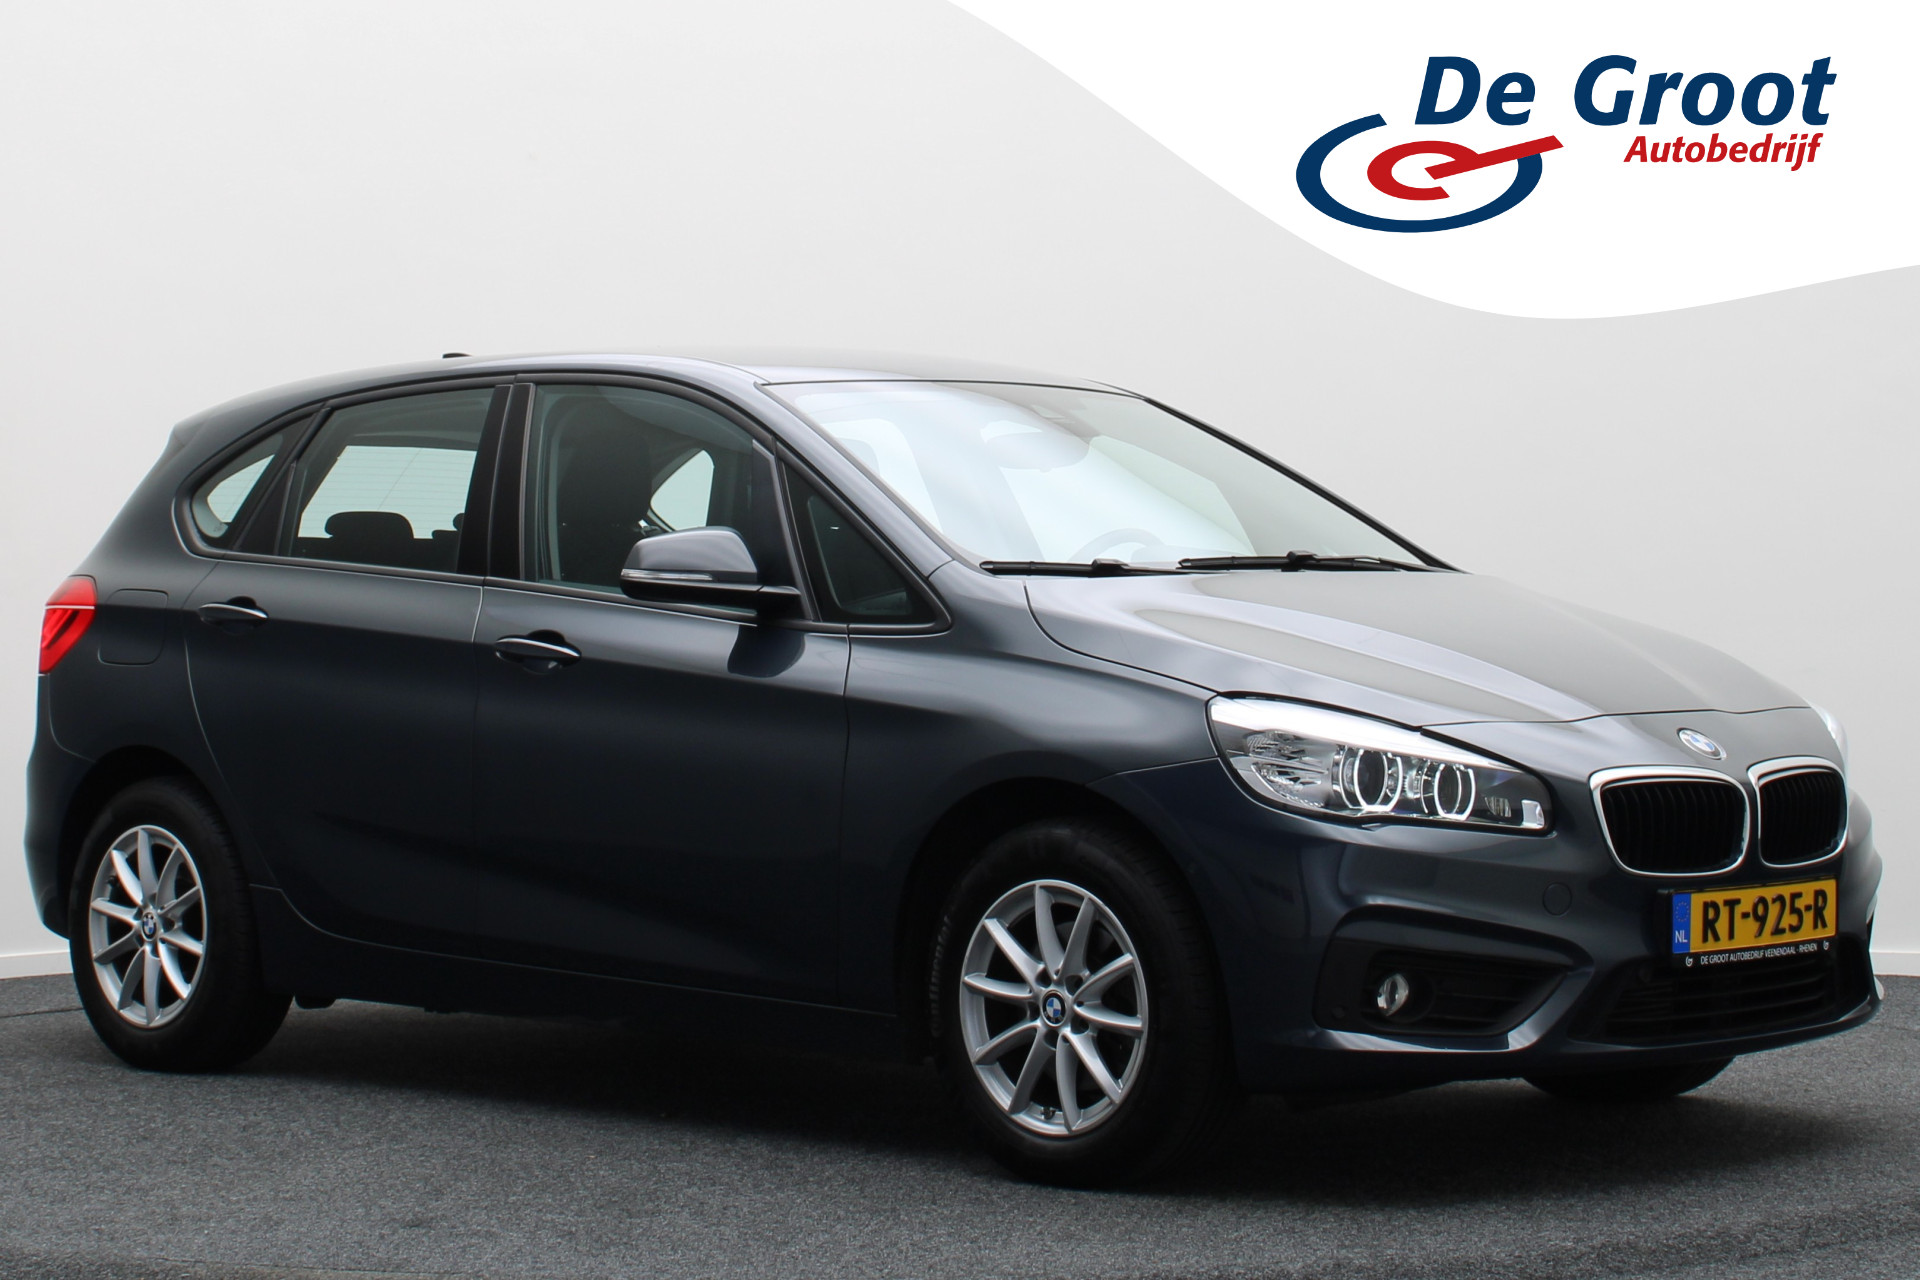 BMW 2 Serie Active Tourer 218i Corporate Lease Executive Automaat LED, Navigatie, Camera, Stoelverw., Parkassist, Remassist, Cruise